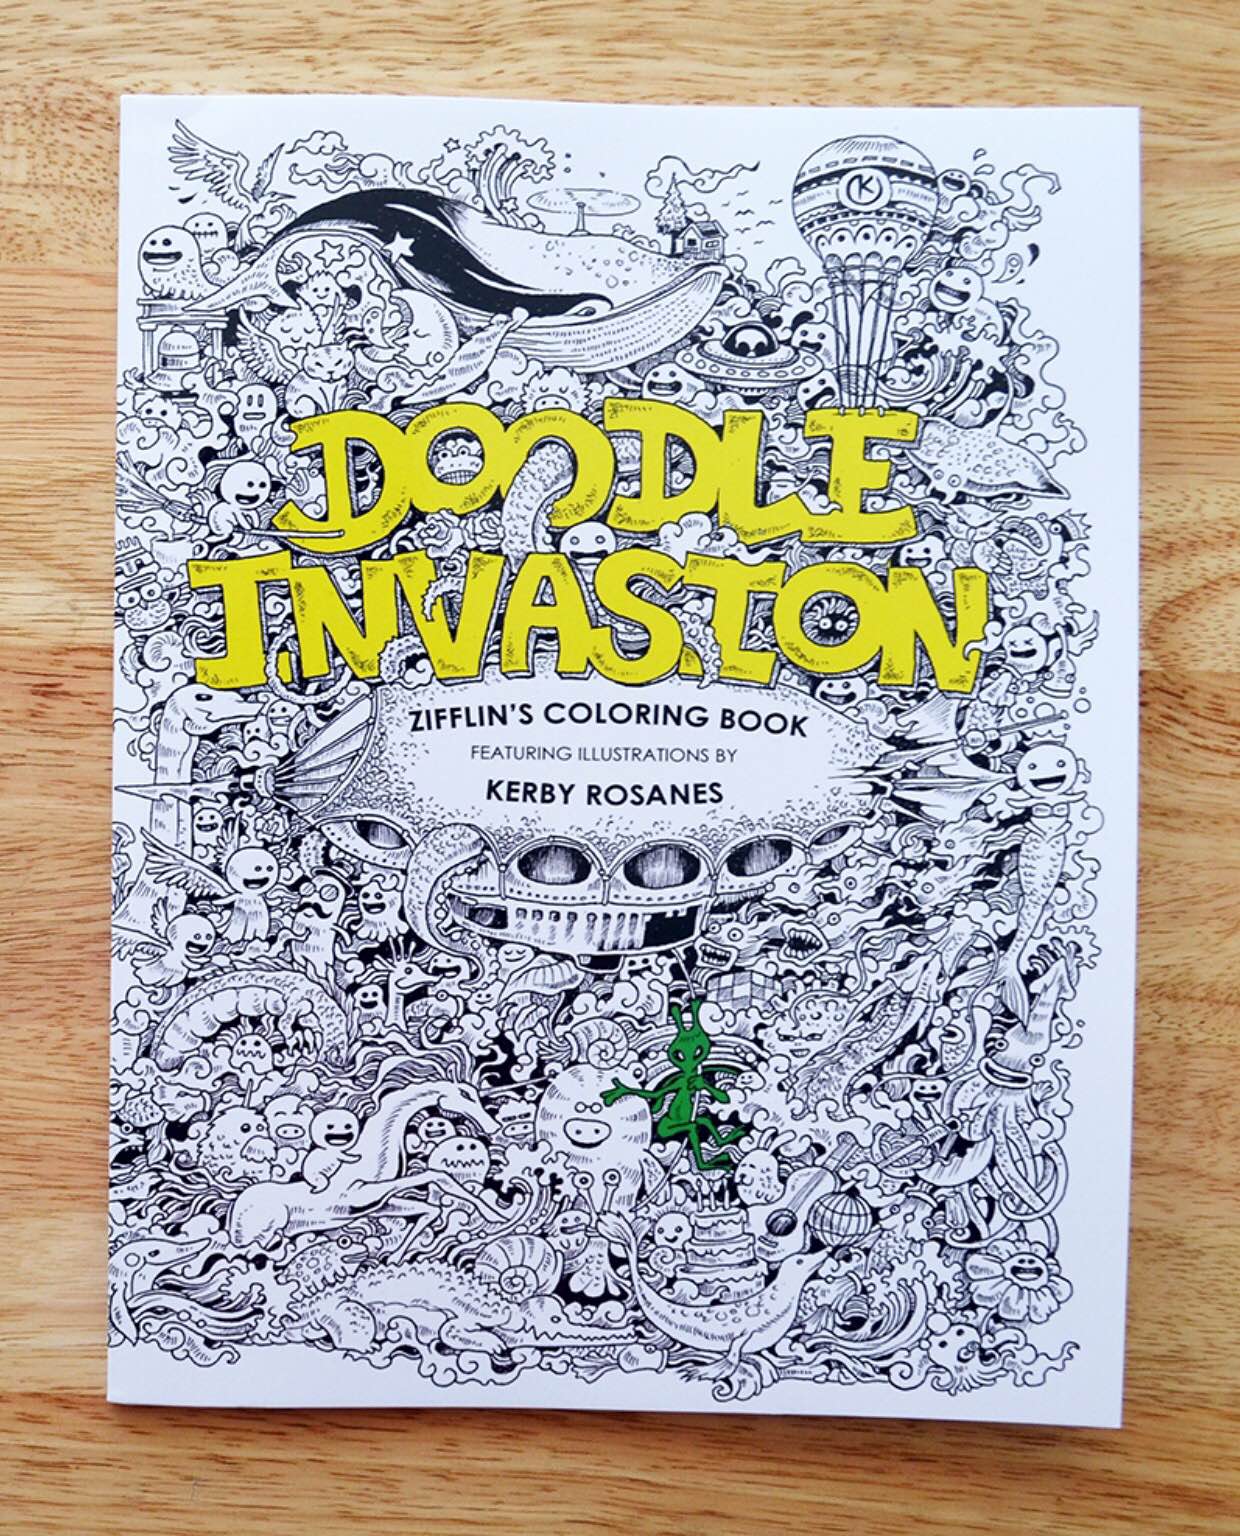 Doodle Invasion by Zifflin and Kerby Rosanes. ($10)